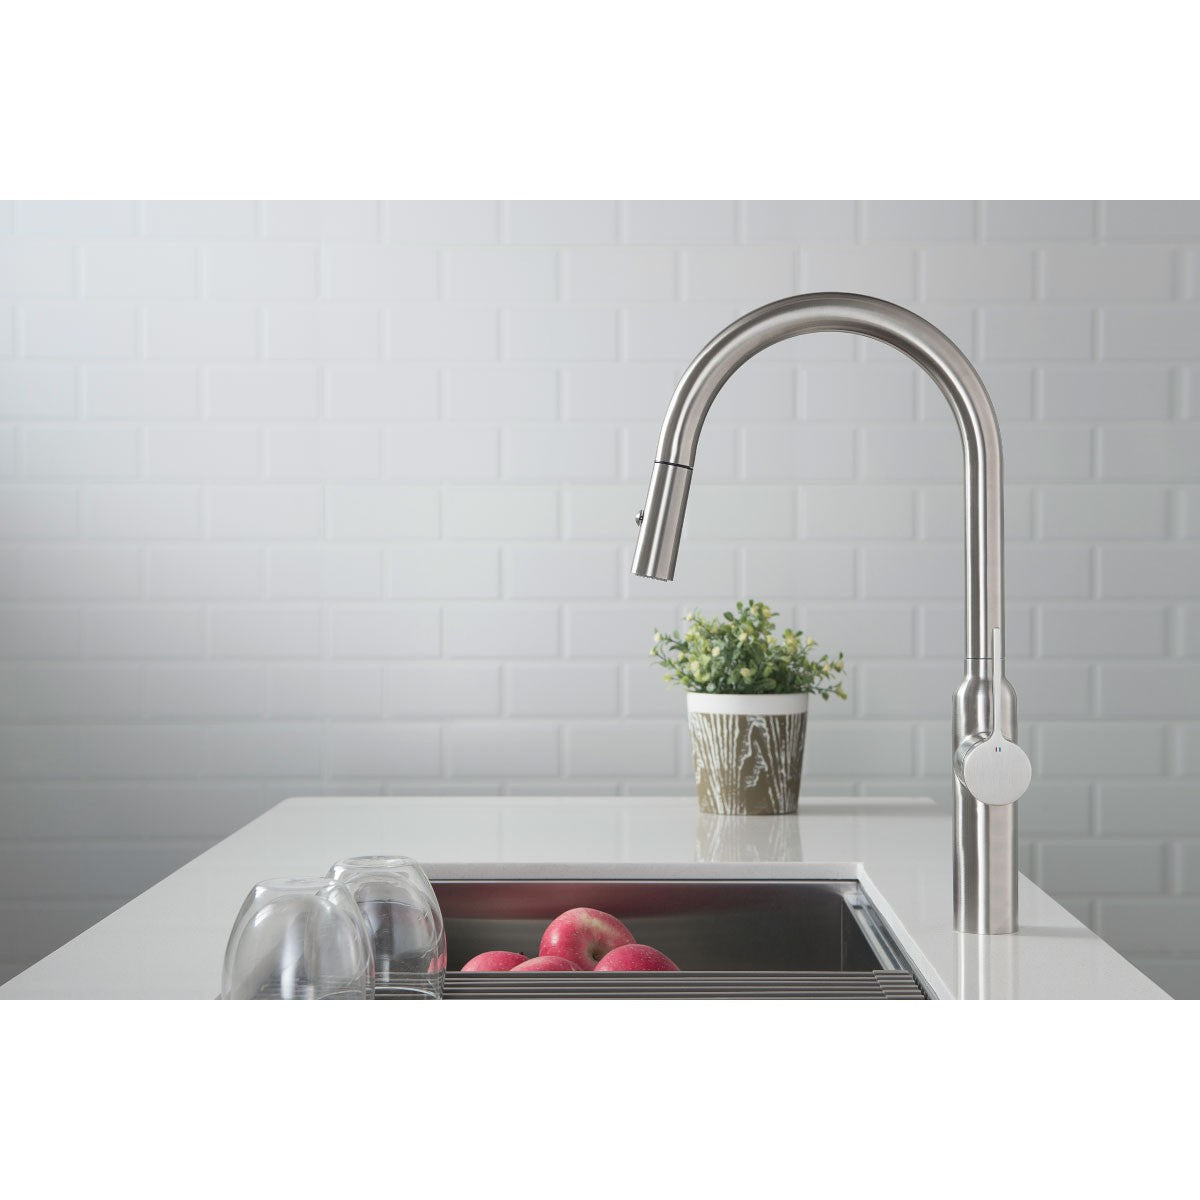 Isenberg Klassiker Ziel 17" Single Hole Stainless Steel Pull-Down Kitchen Faucet With Dual Function Sprayer